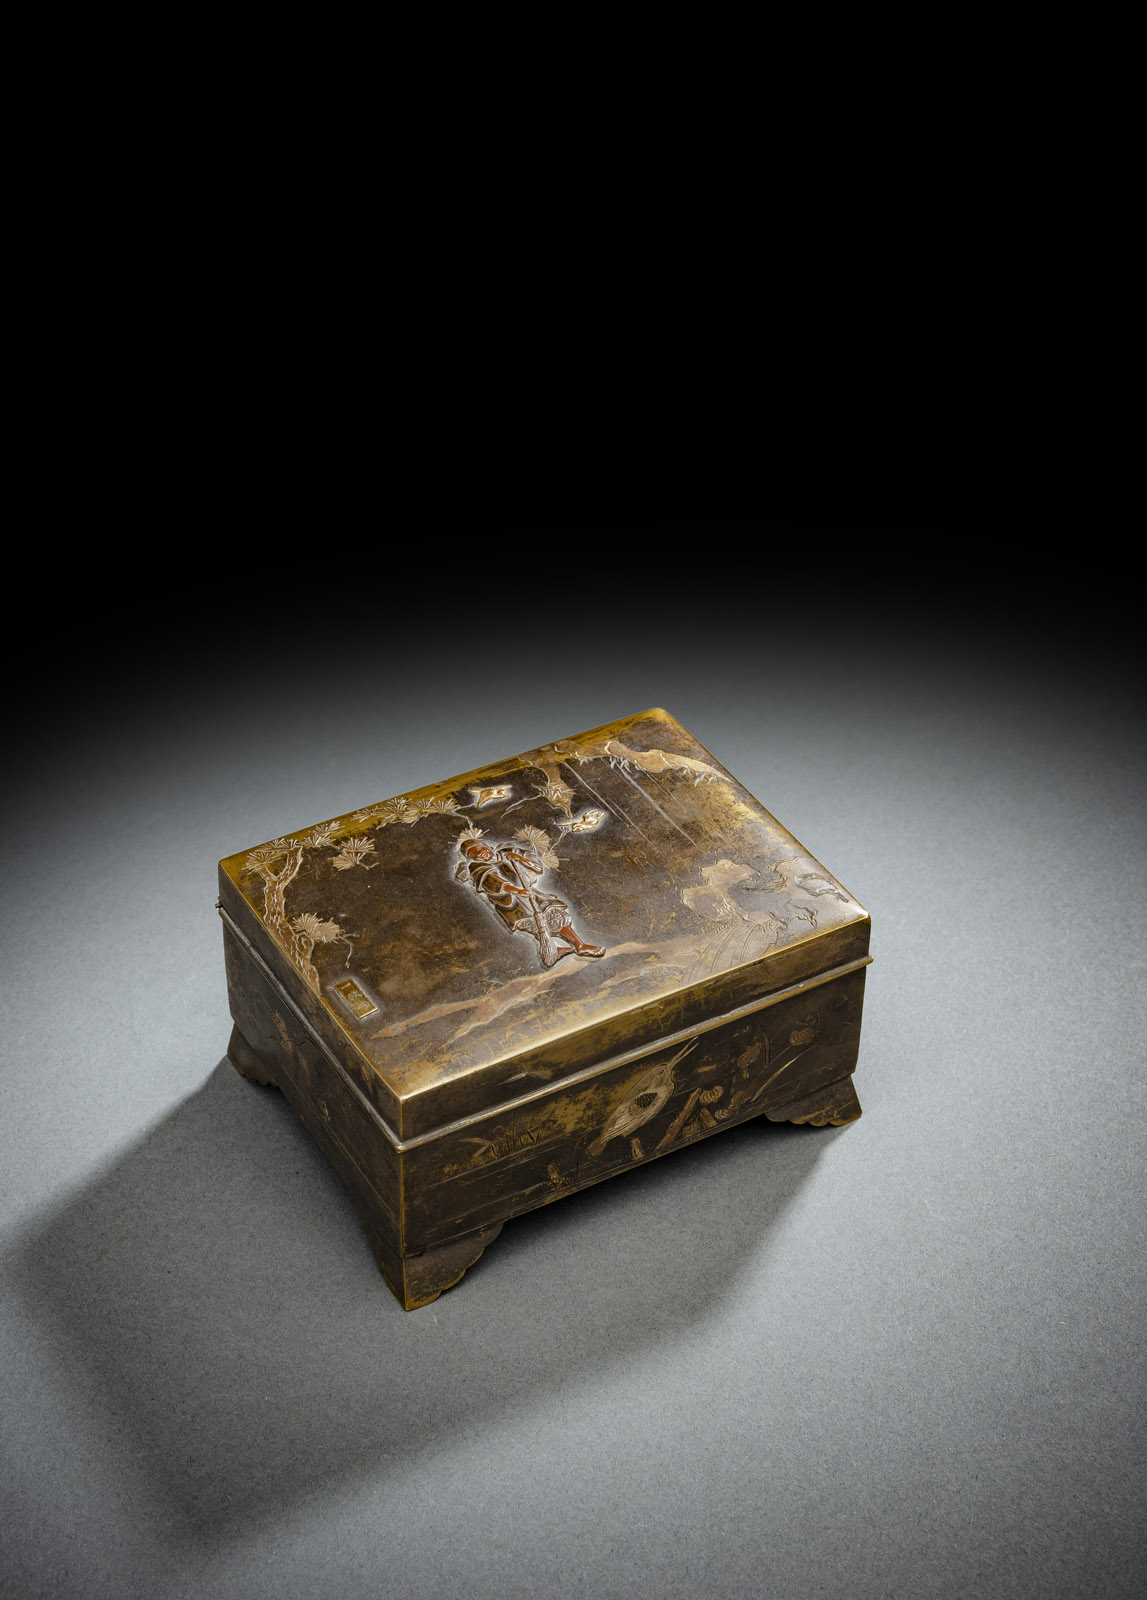 <b>A BRONZE BOX WITH HINGED COVER DECORATED WITH A SWEEPING MAN AND TWO BIRDS IN A PINE TREE</b>